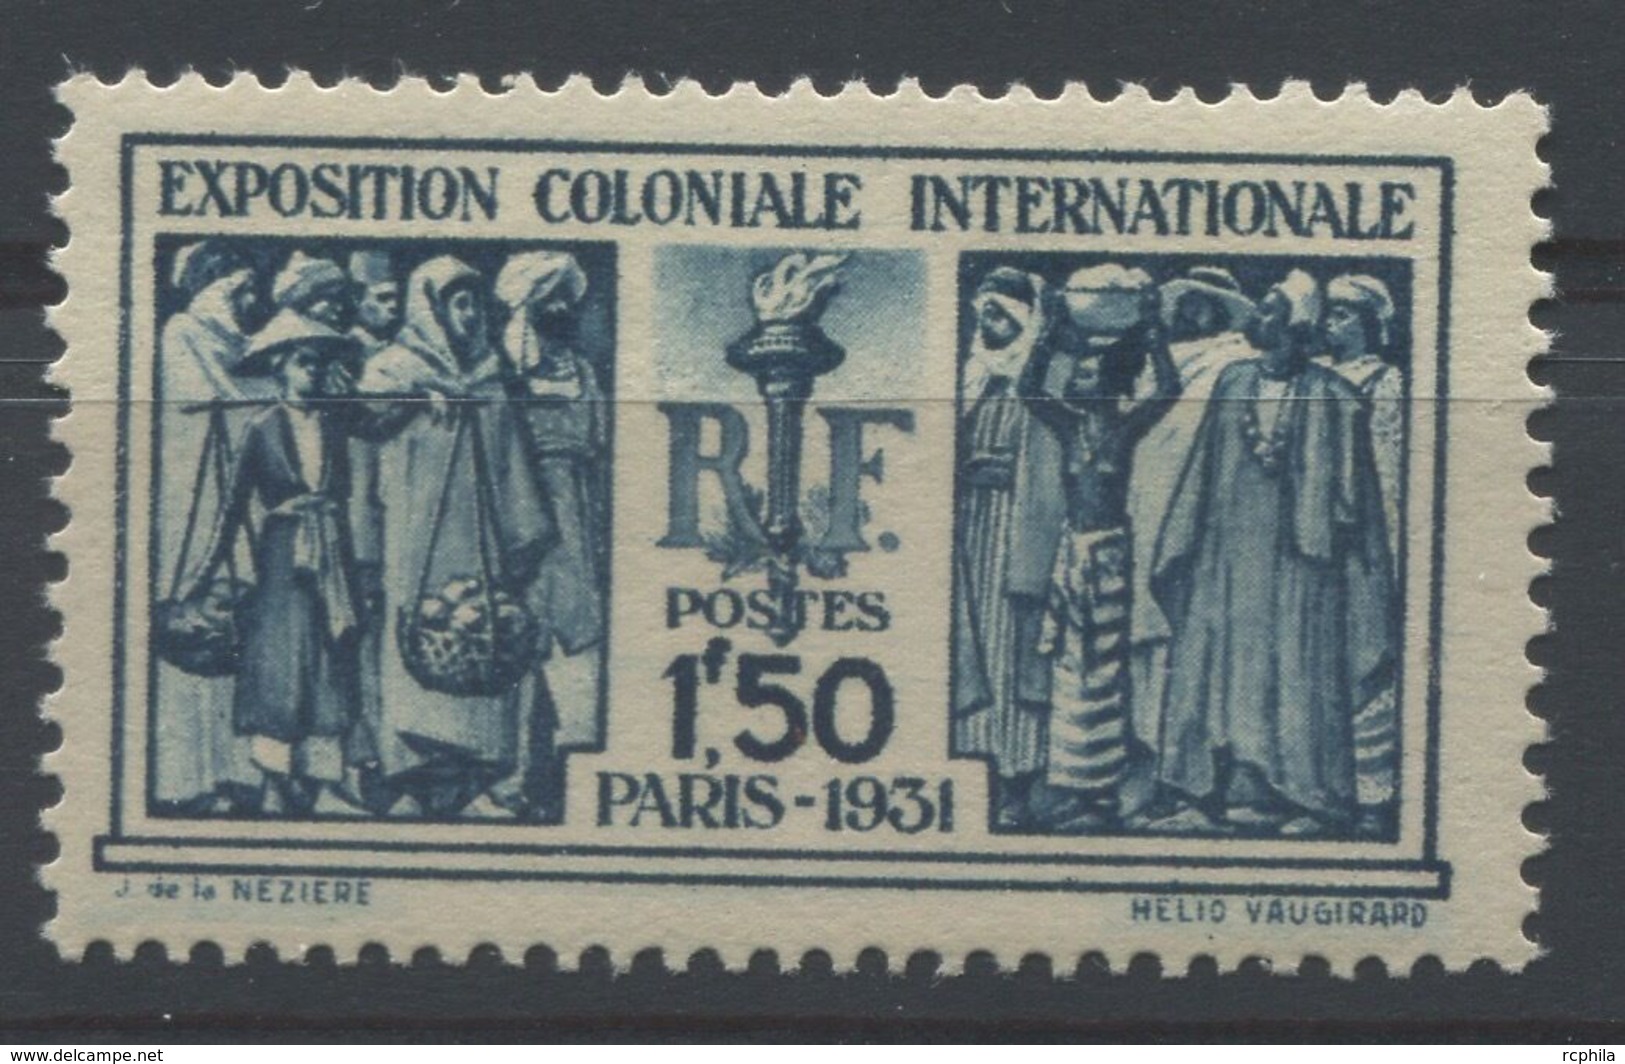 RC 15848 FRANCE N° 274 COTE 110€ - 1F50 BLEU EXPOSITION COLONIALE NEUF ** MNH TB - Ungebraucht